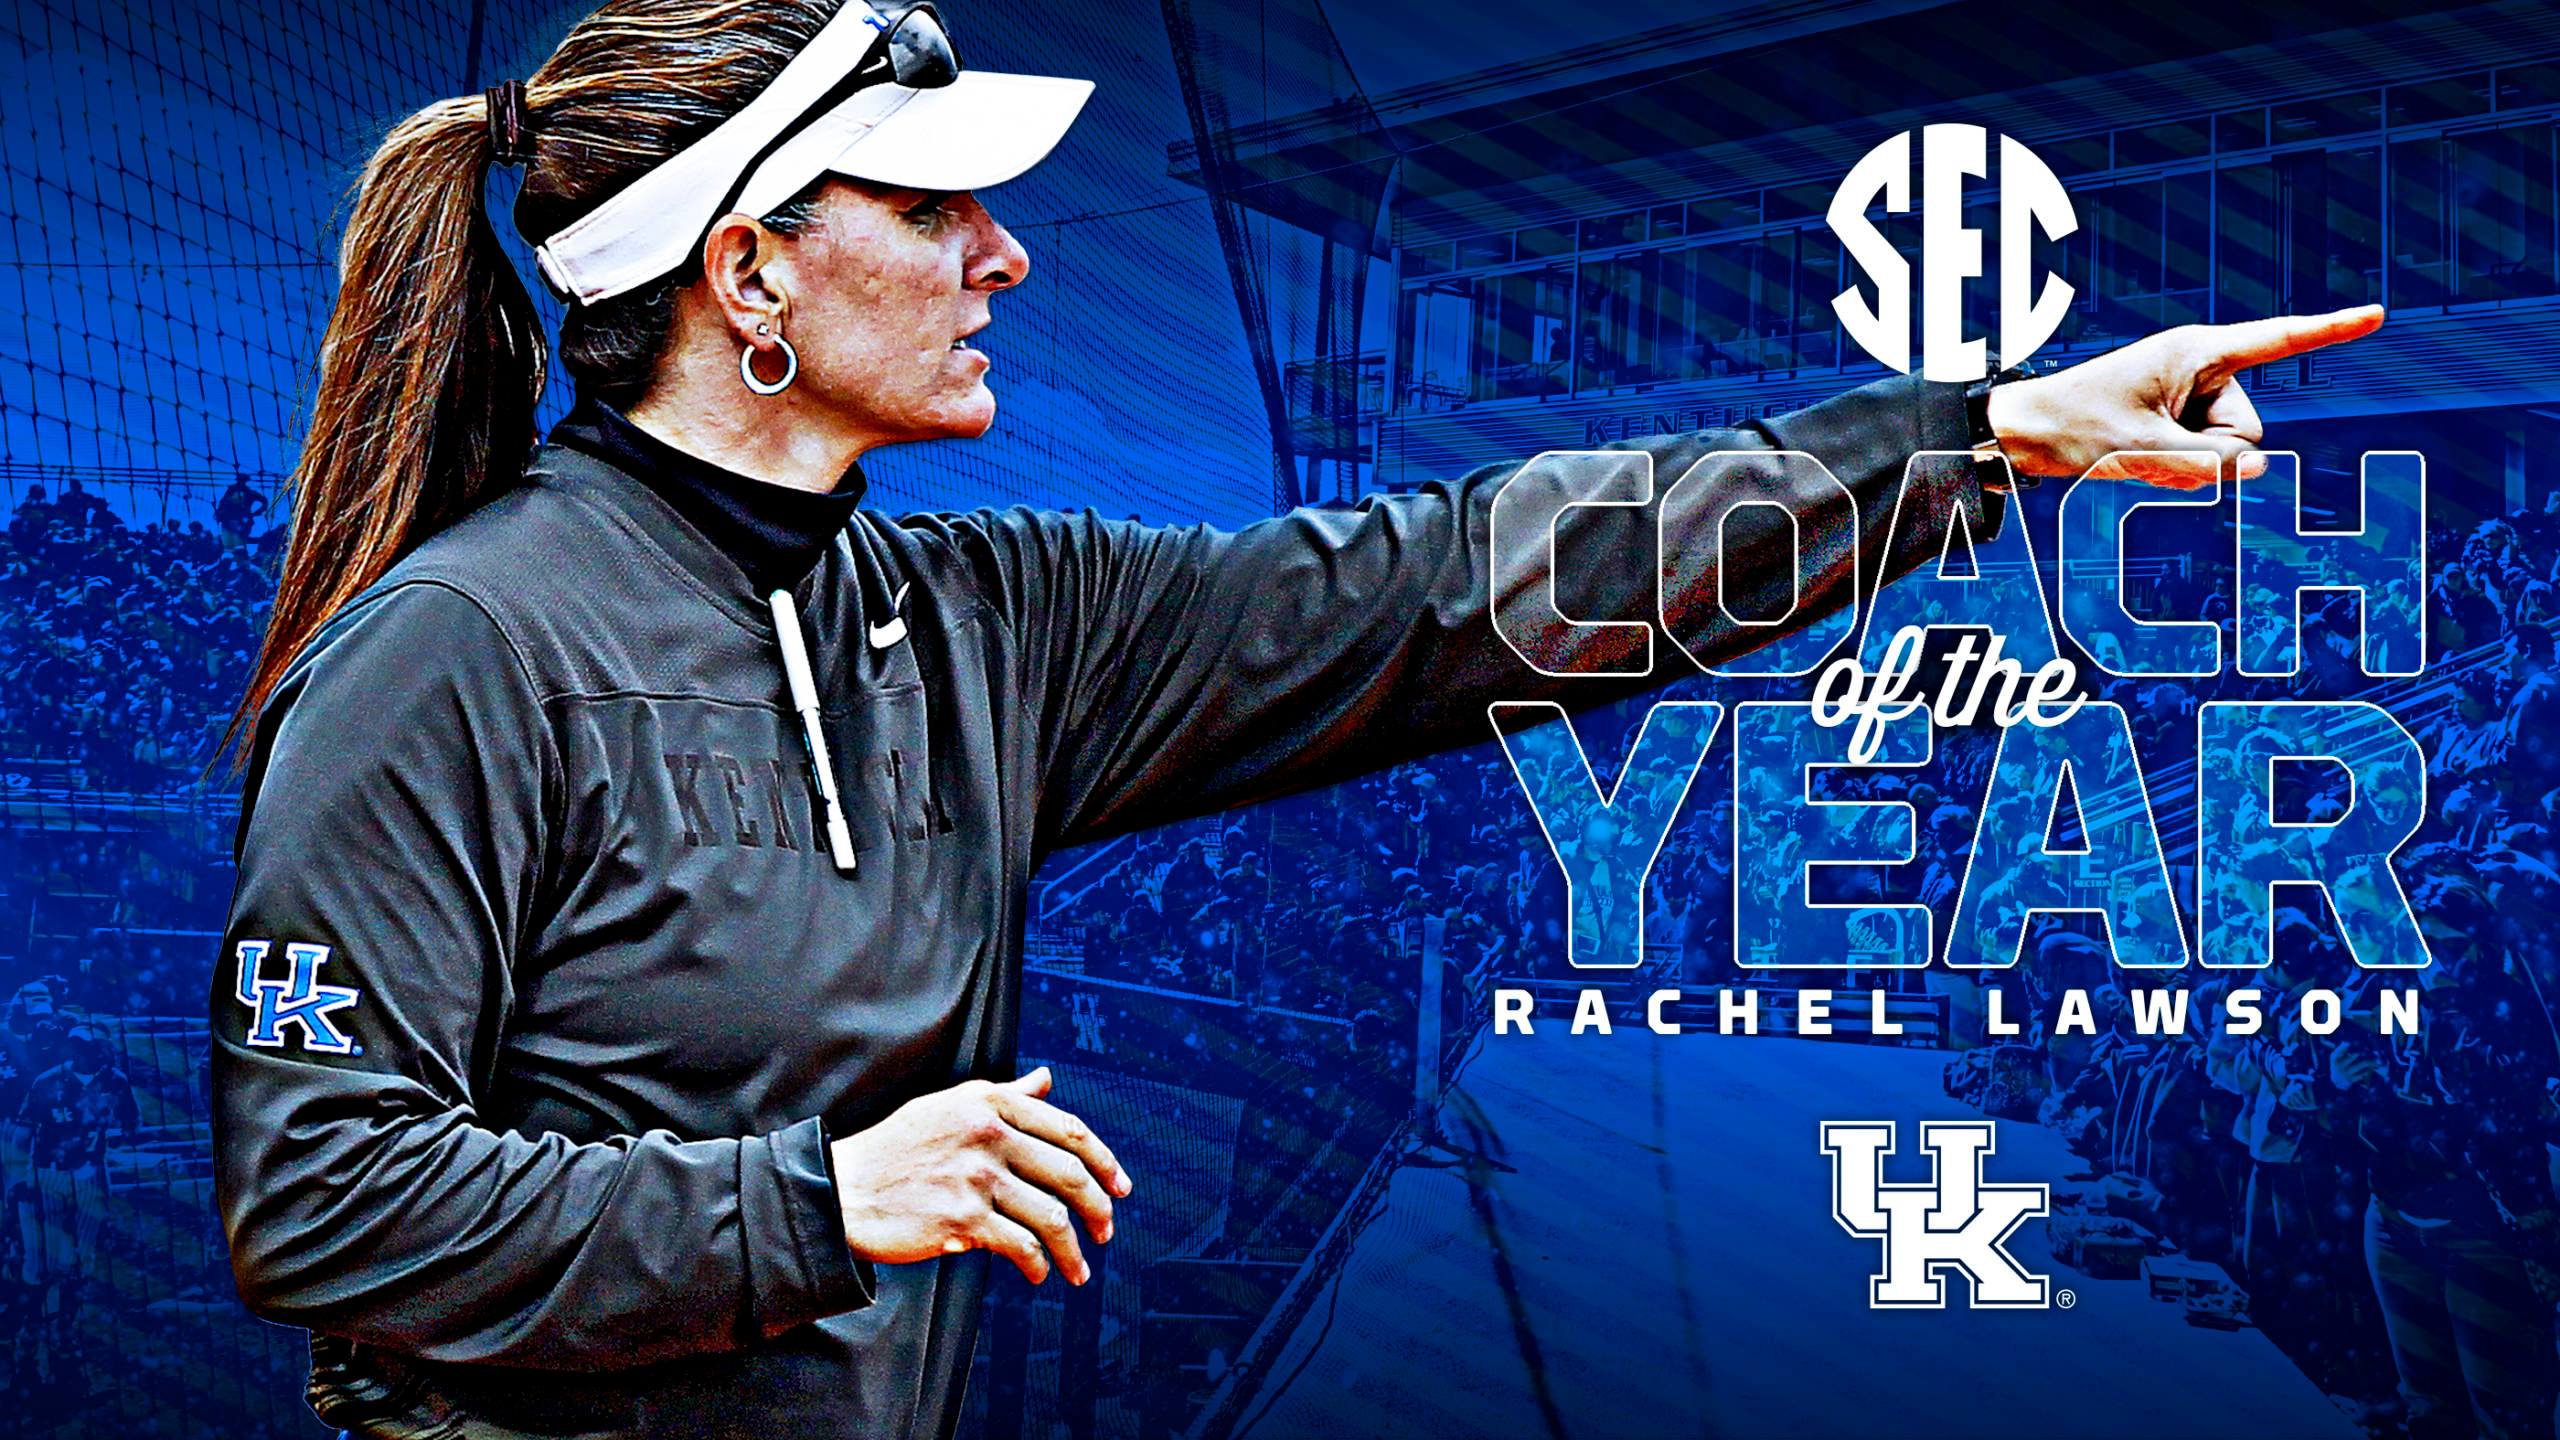 Rachel Lawson Crowned SEC Coach of the Year